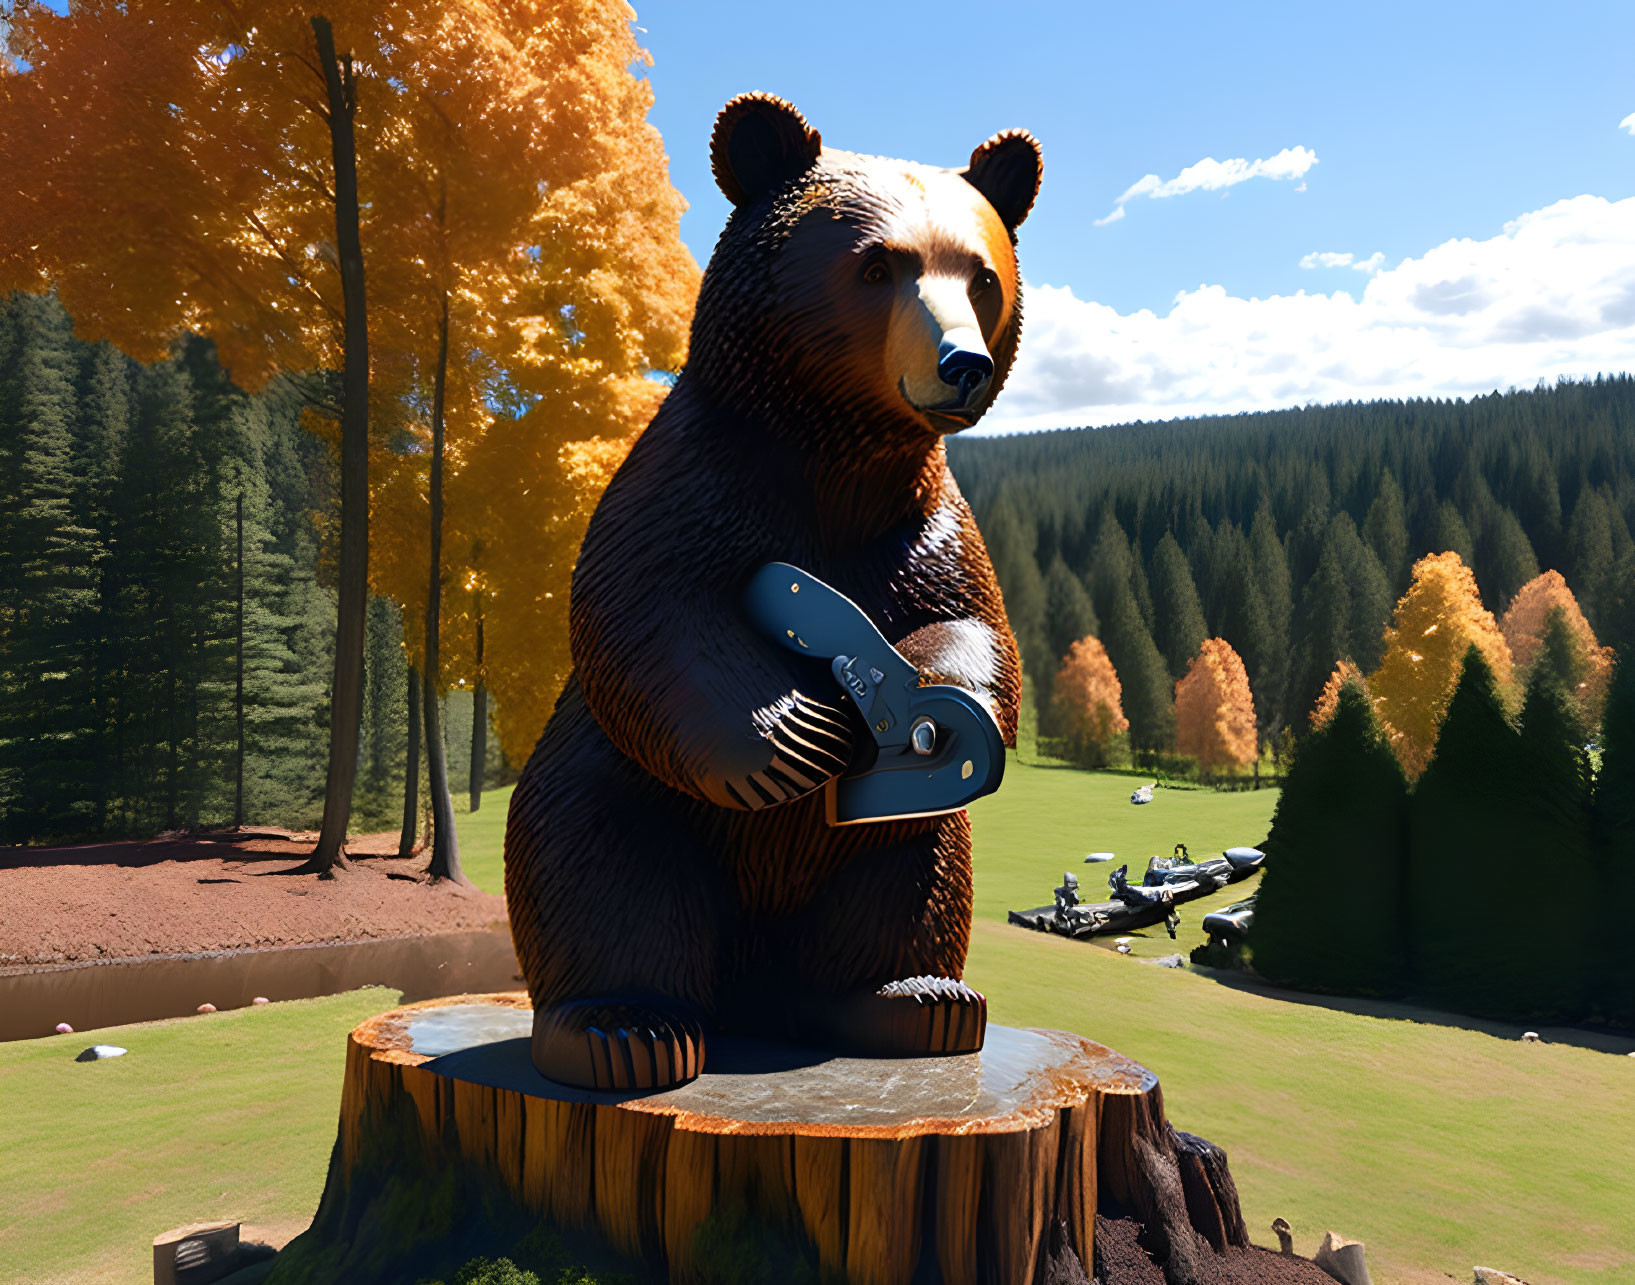 Large bear statue with game controllers in sunny park setting